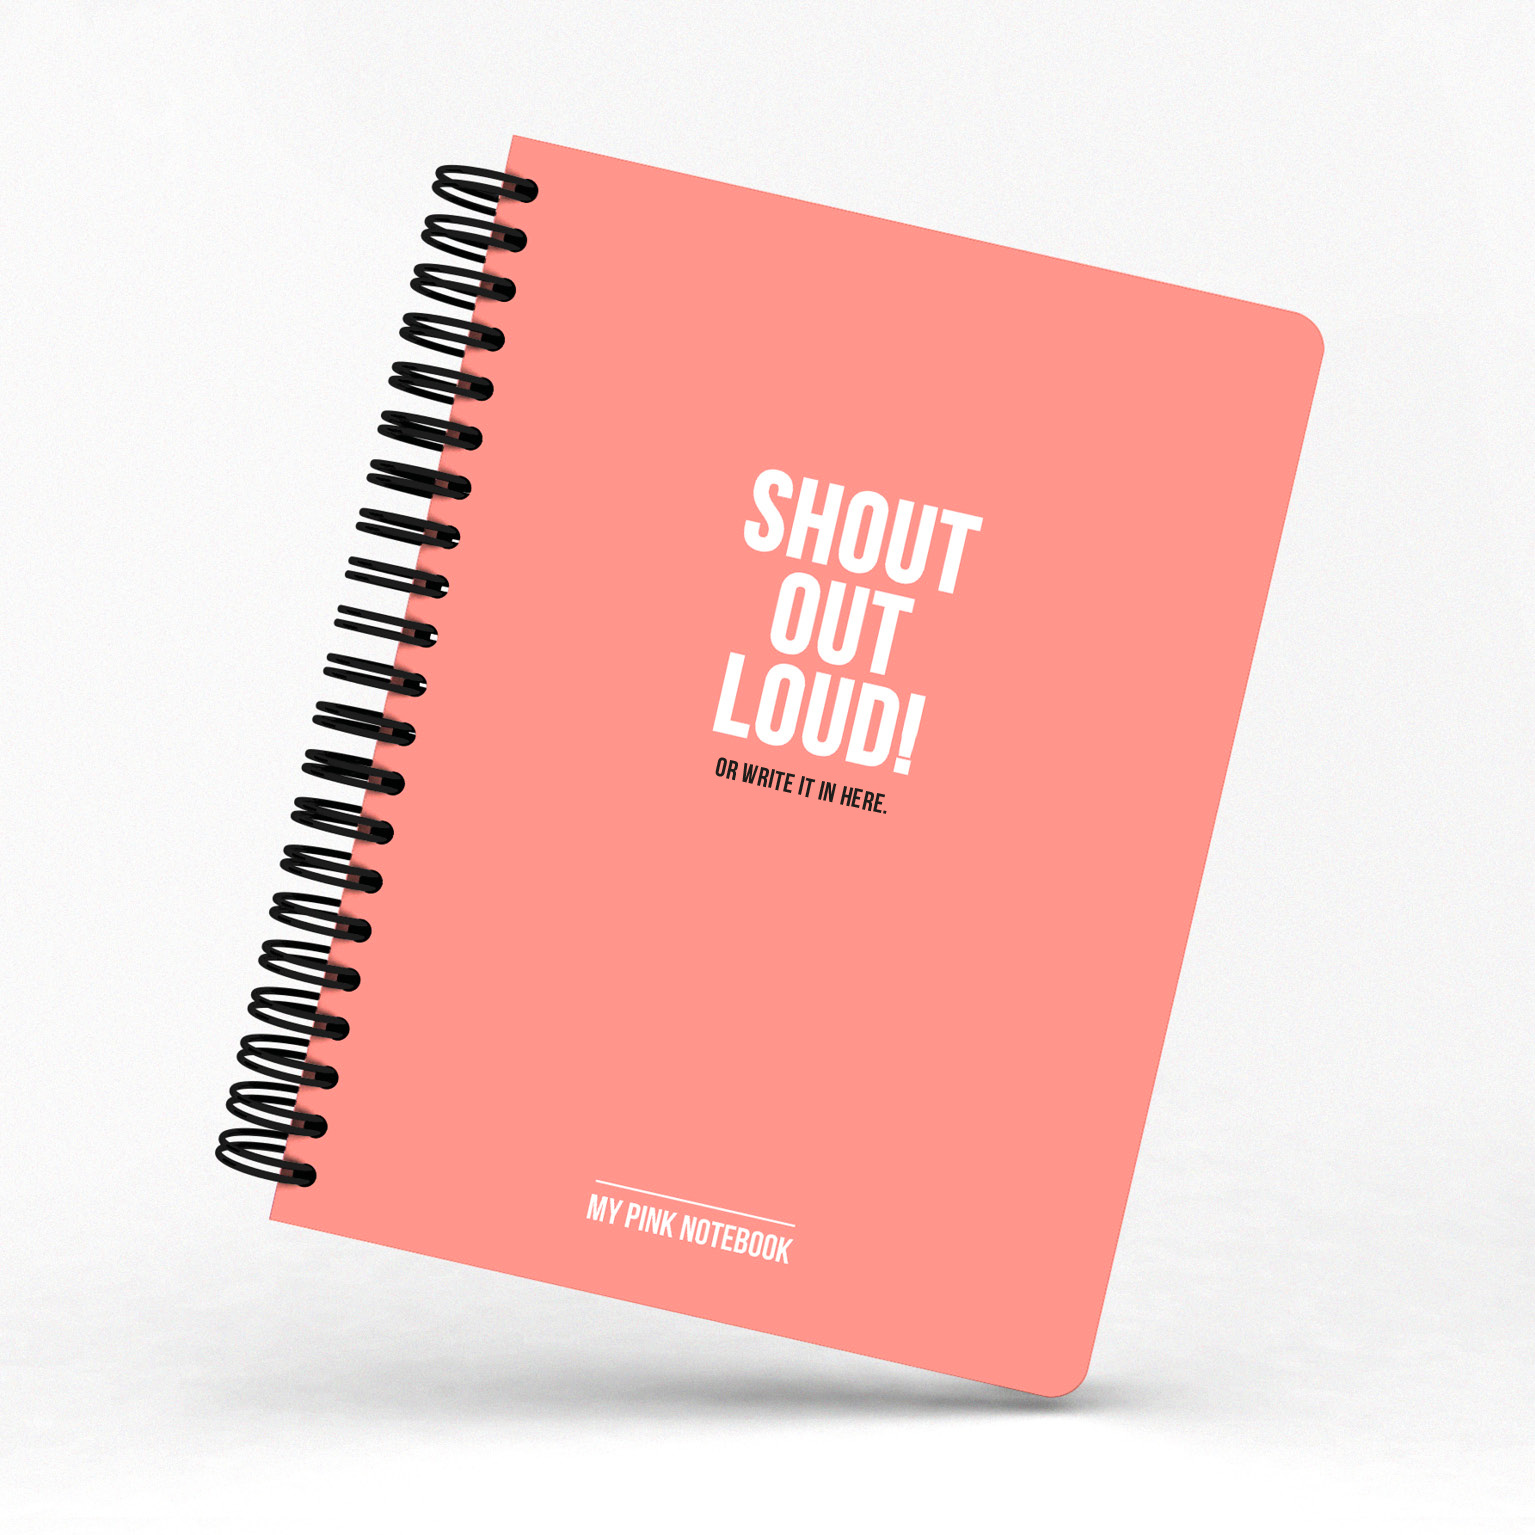 My pink notebook shout out loud